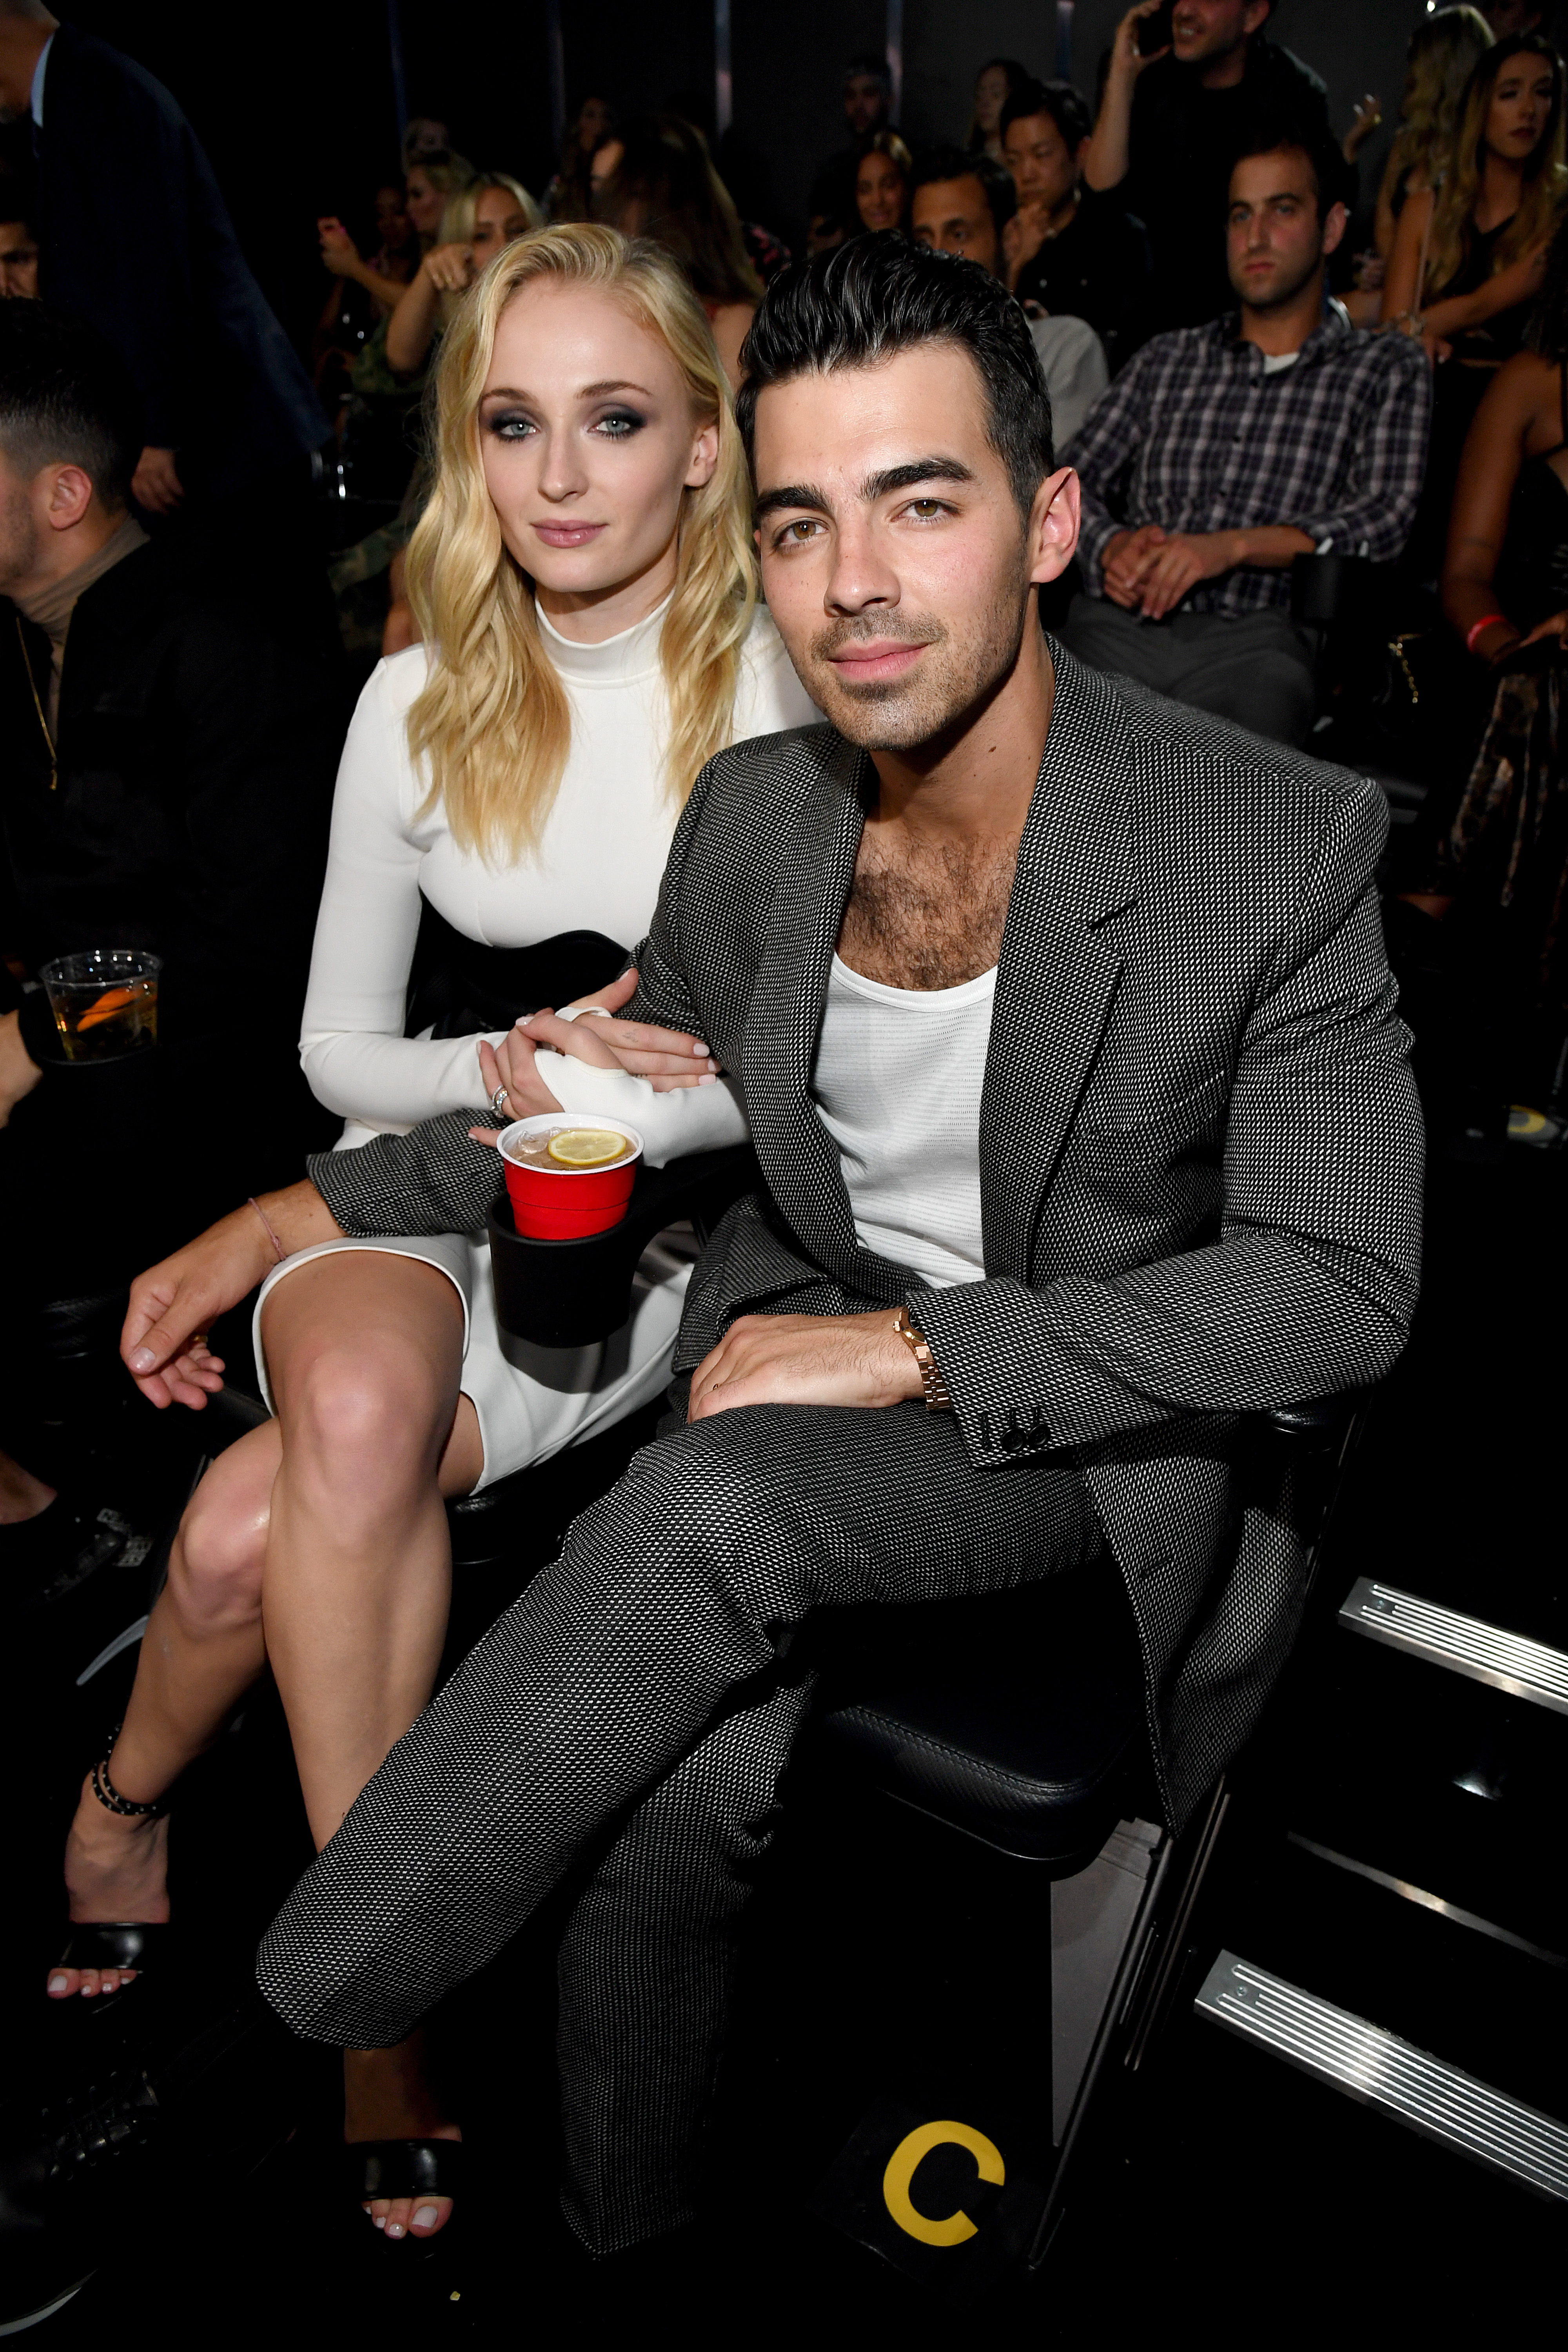 Close-up of Joe and Sophie sitting together